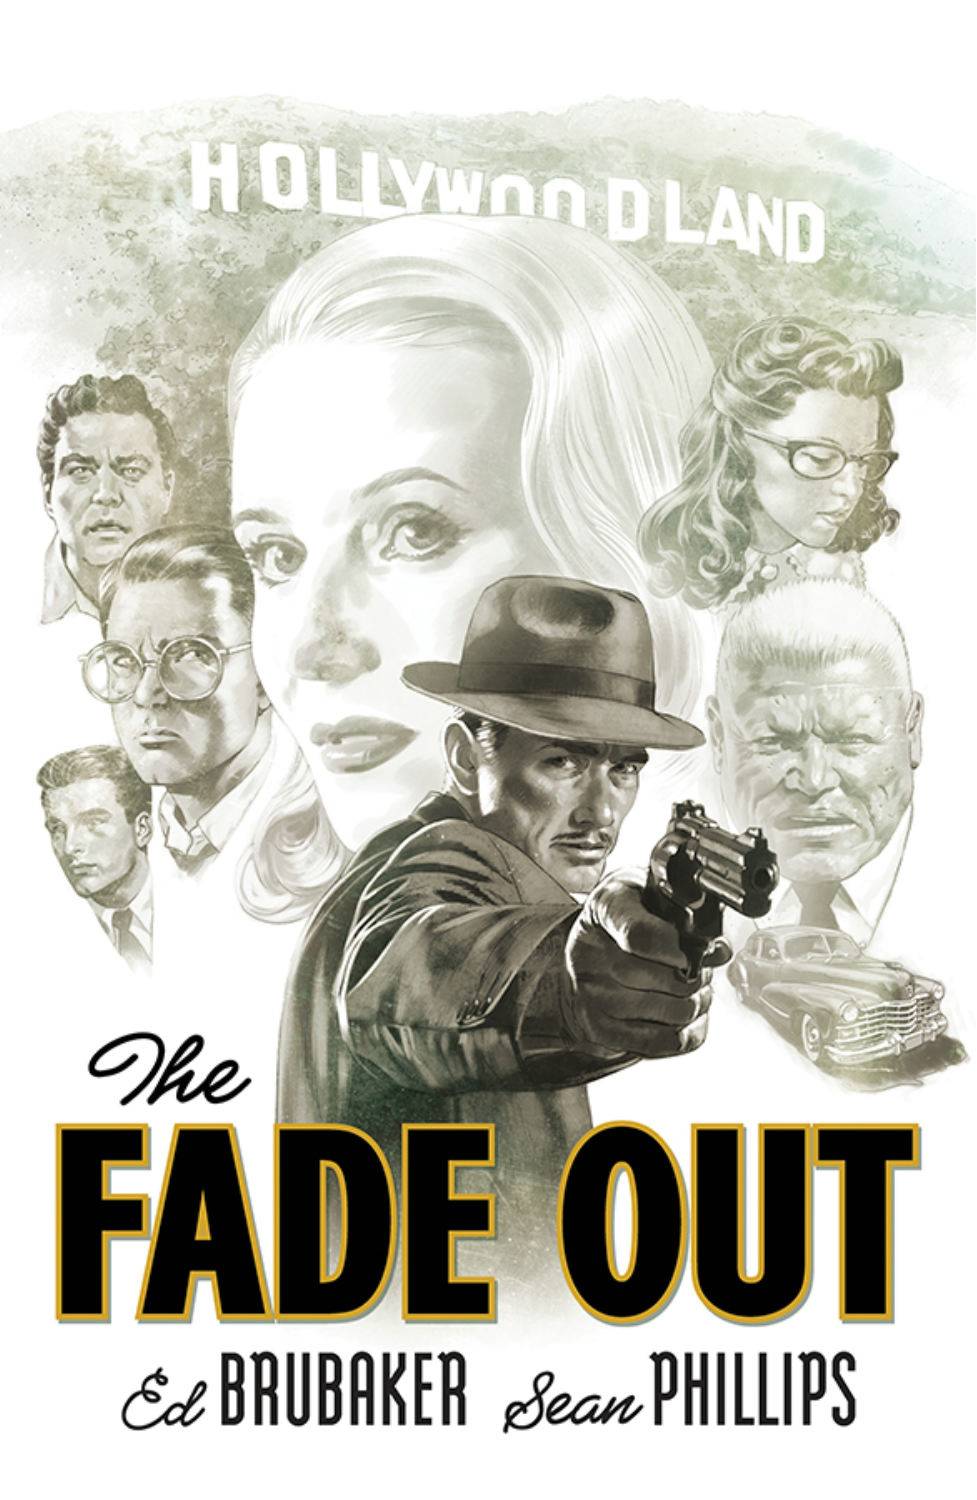 FADE OUT COMP COLL TP (AUG180136) (MR)